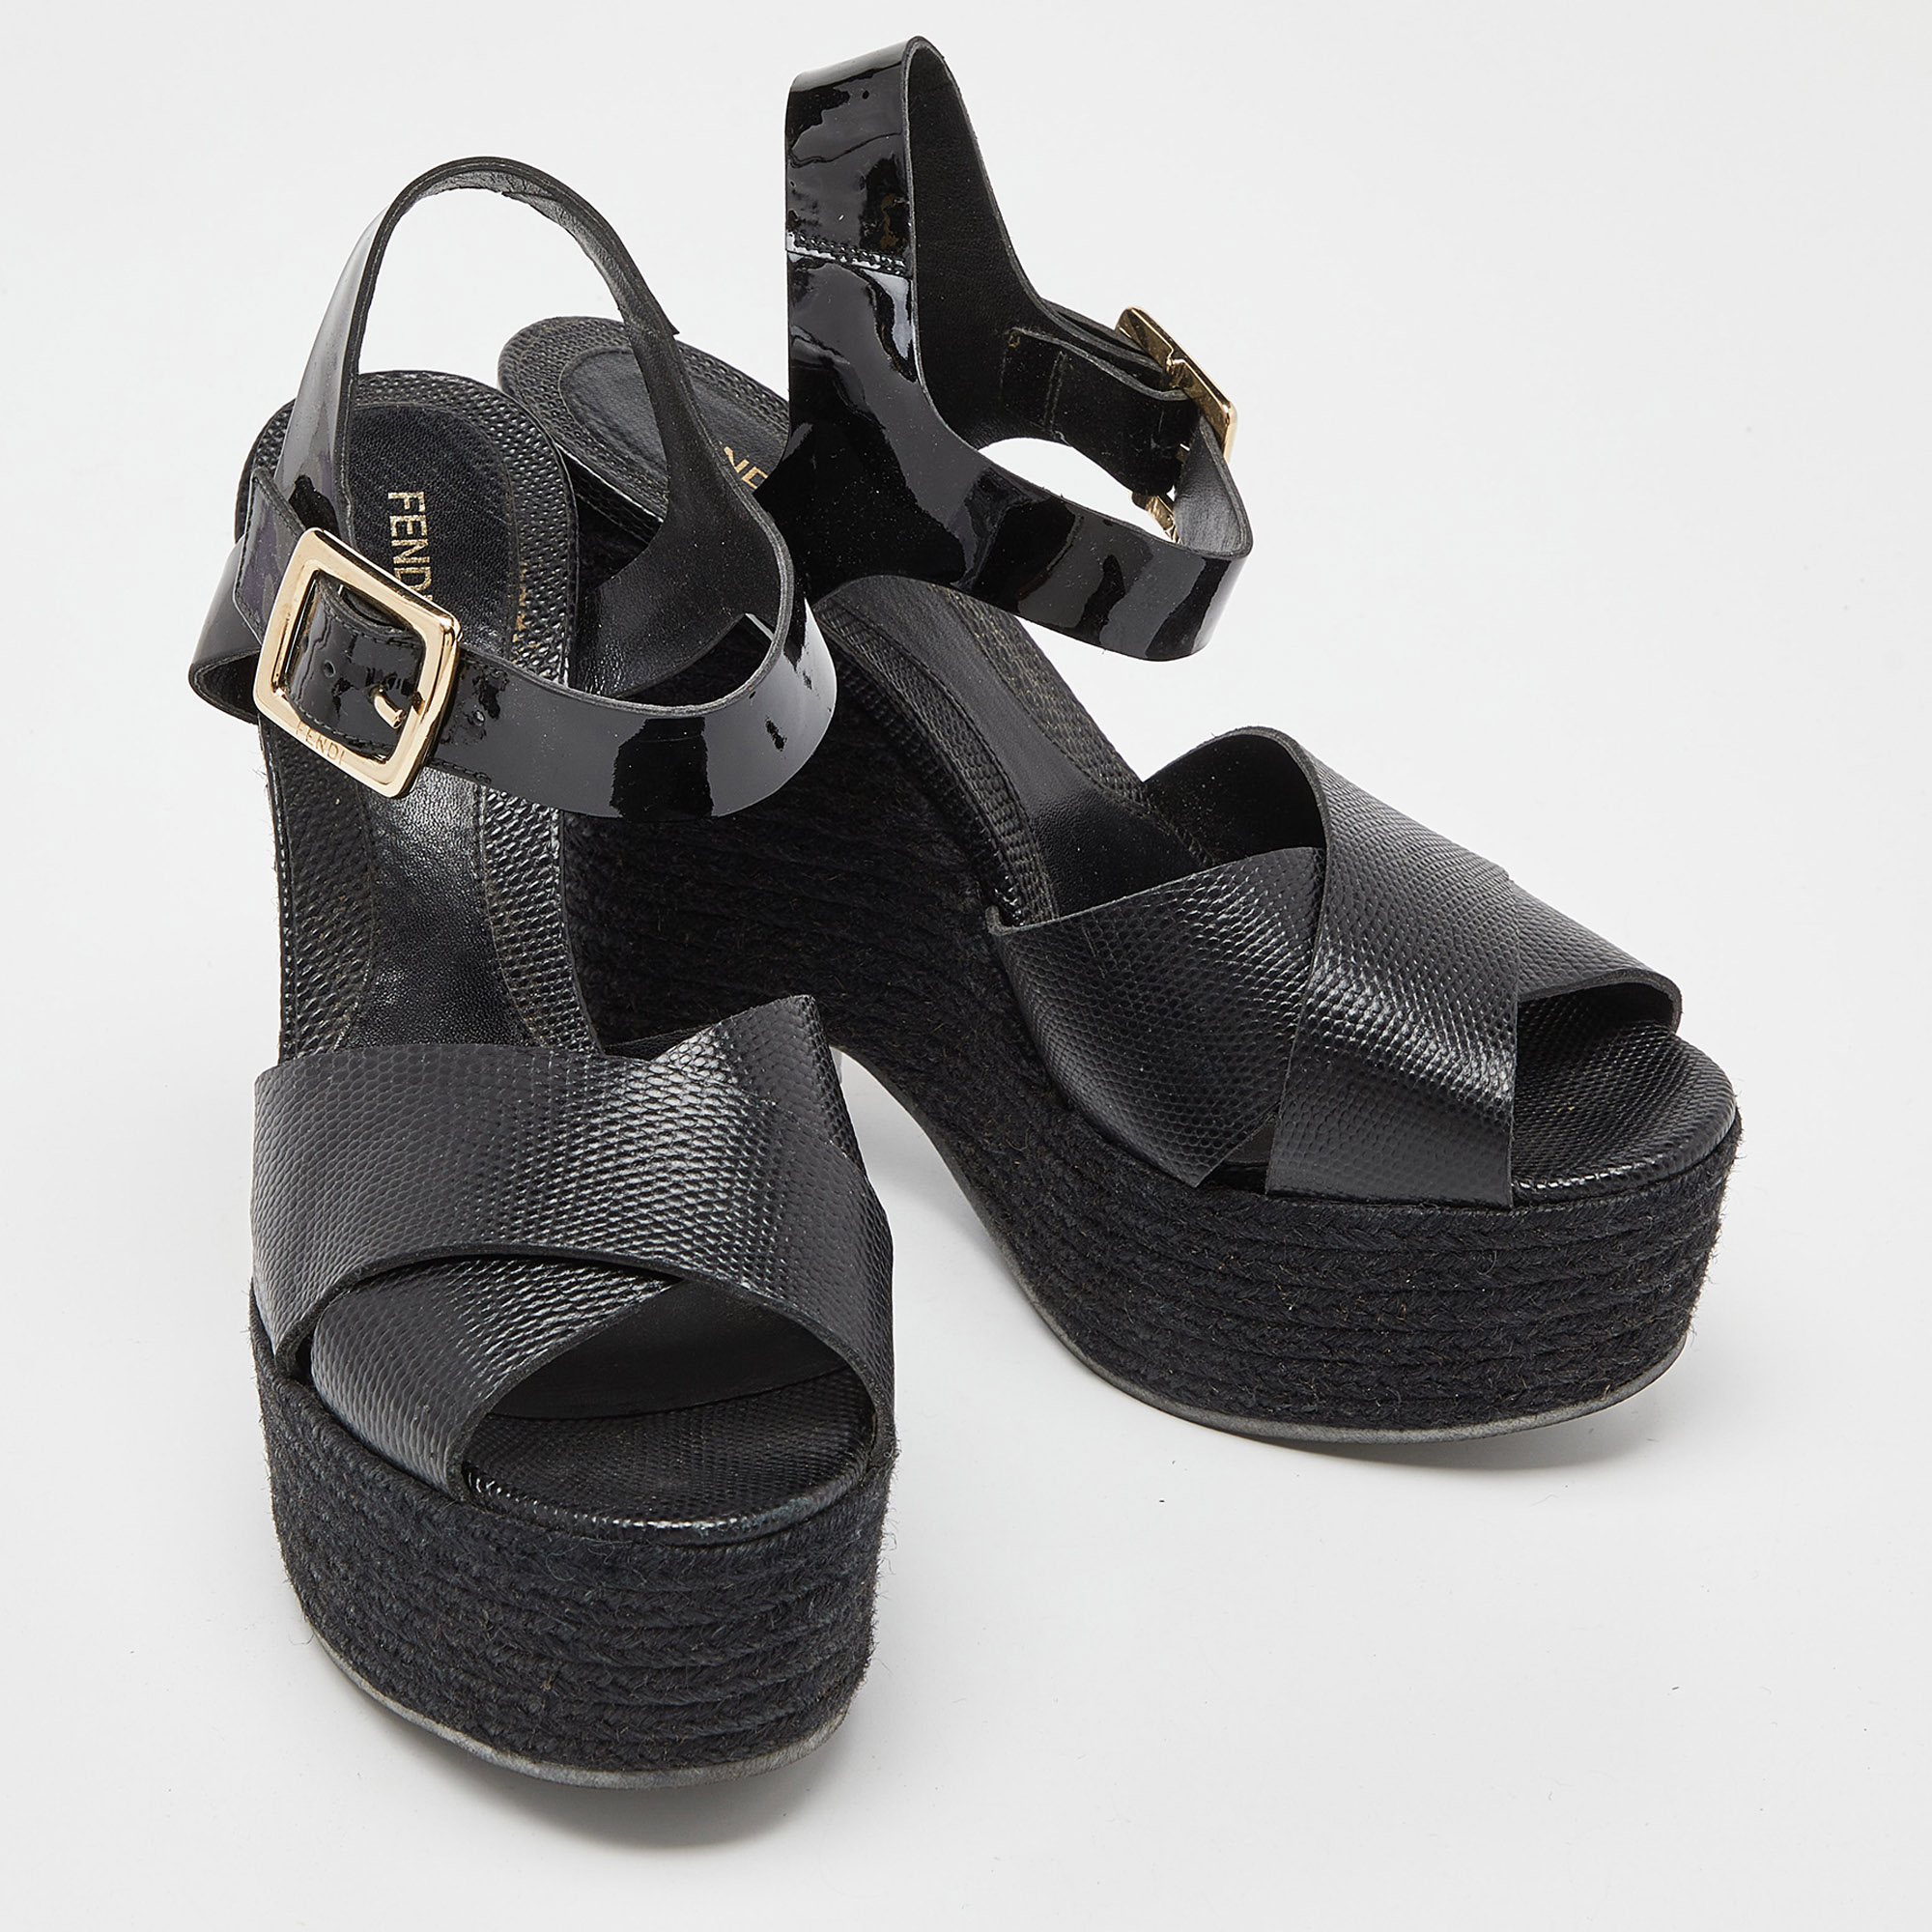 Fendi Black Lizard Embossed Leather And Patent Cork Wedge Platform Ankle Strap Sandals Size 39.5